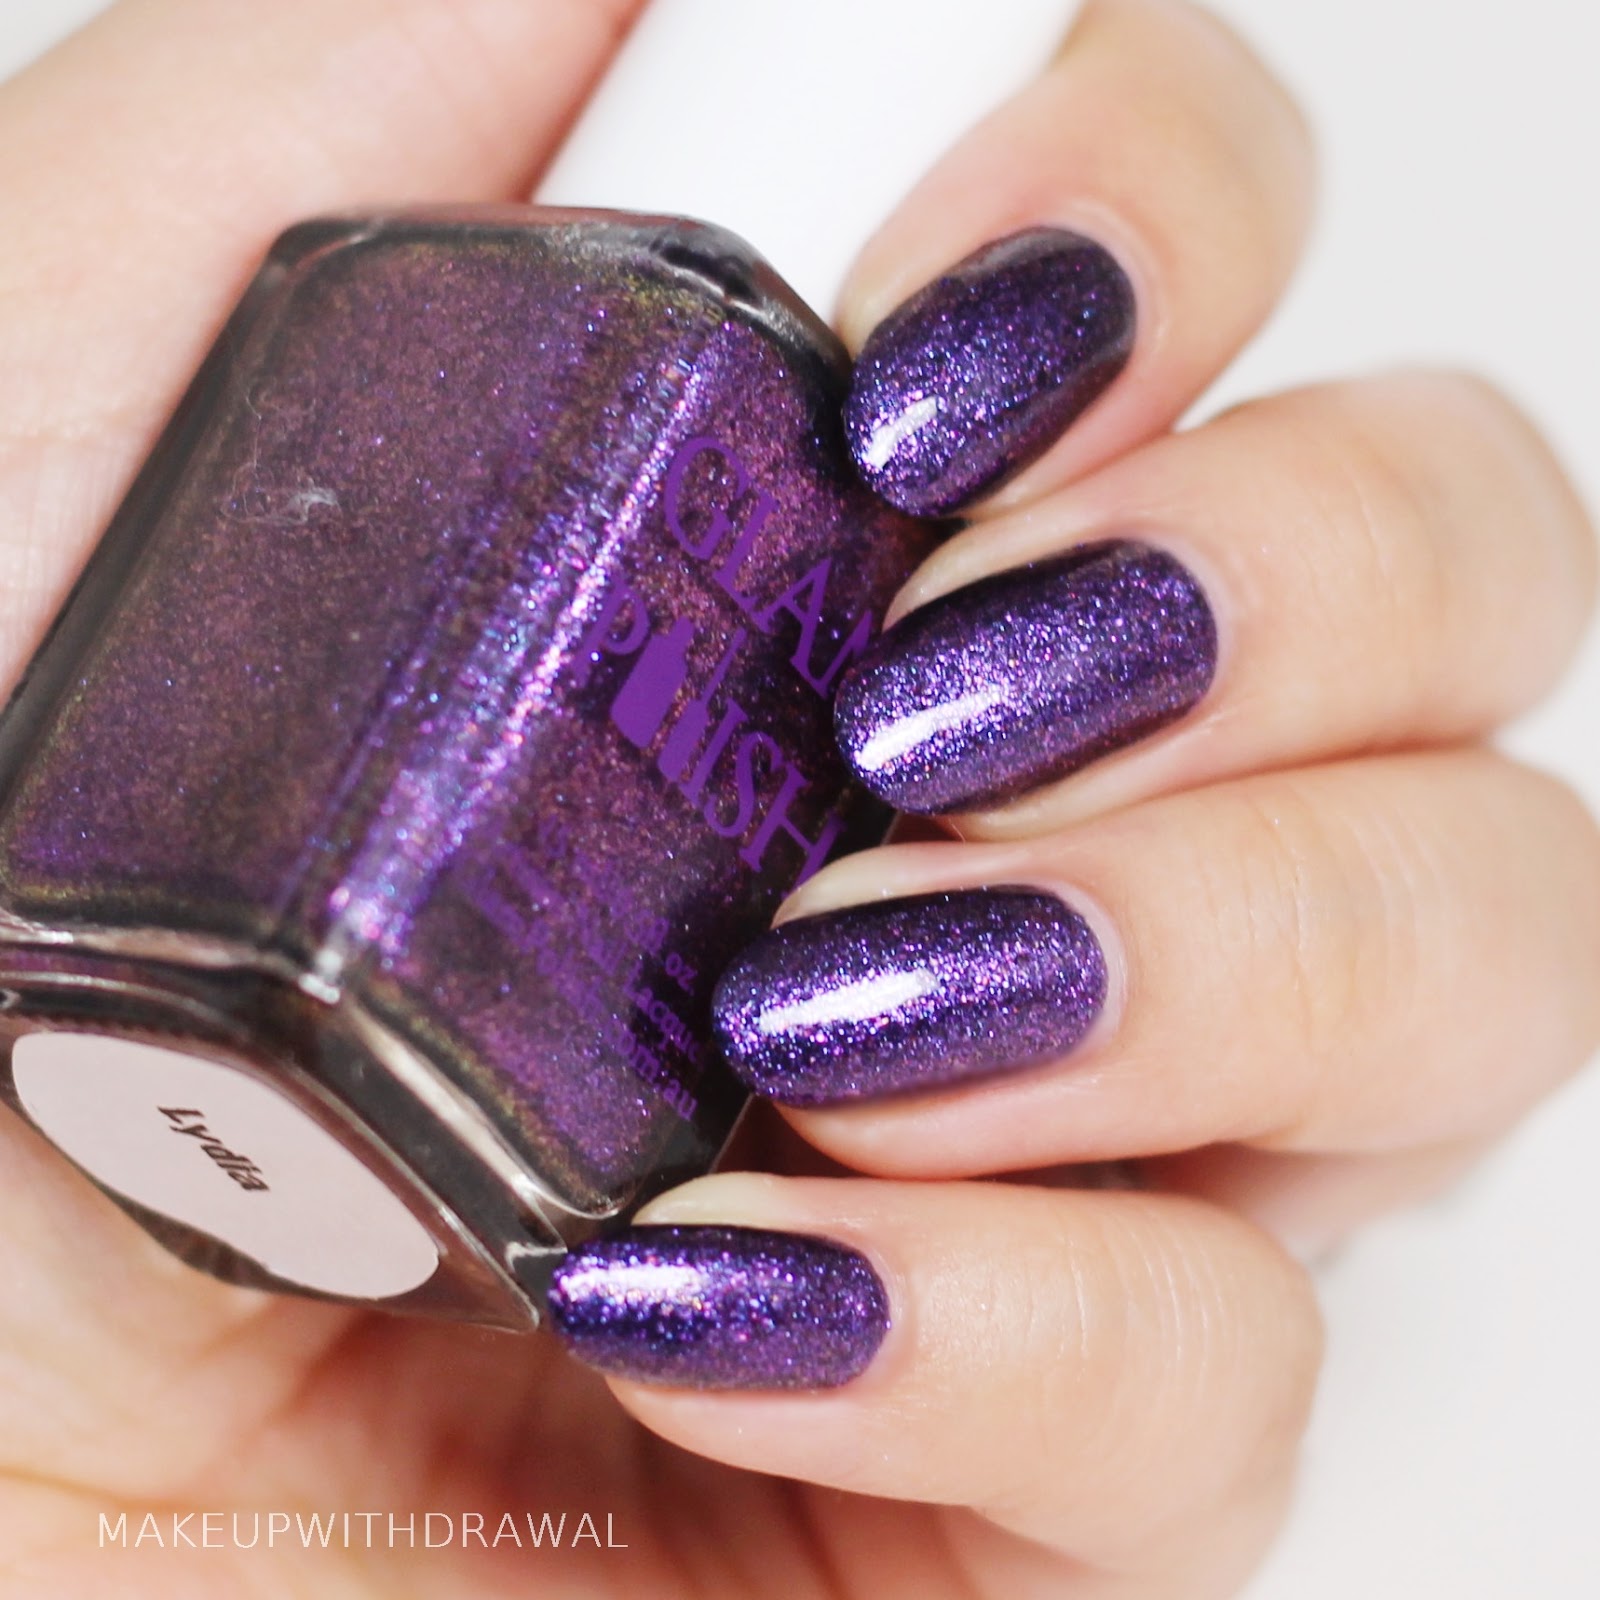 Glam Polish Heart of Darkness Collection | Makeup Withdrawal